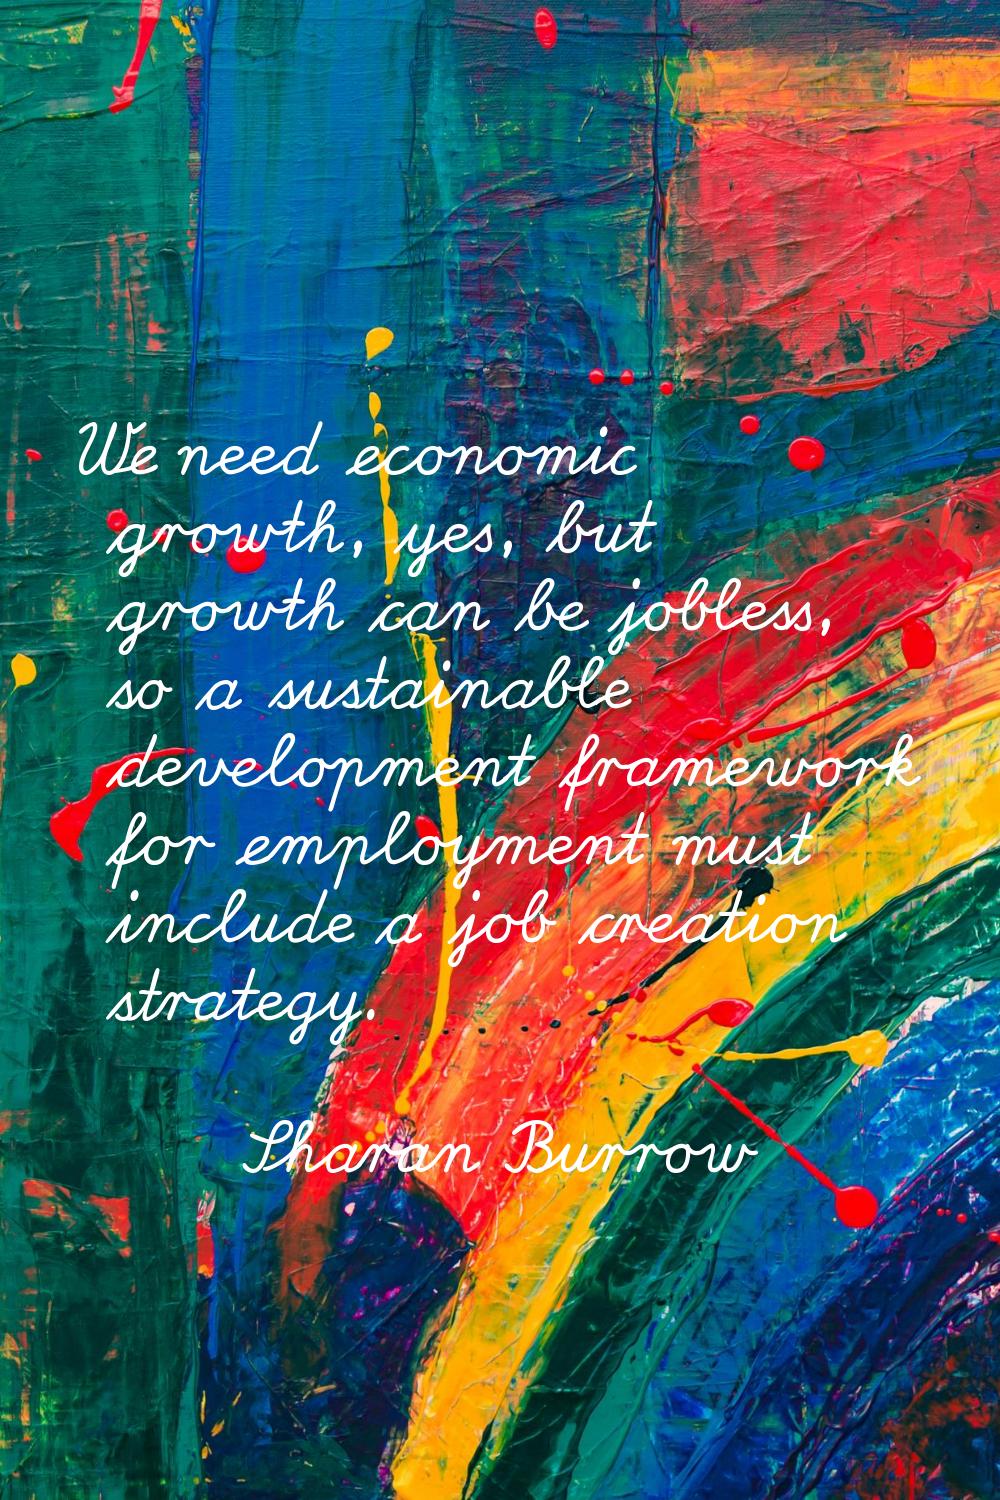 We need economic growth, yes, but growth can be jobless, so a sustainable development framework for